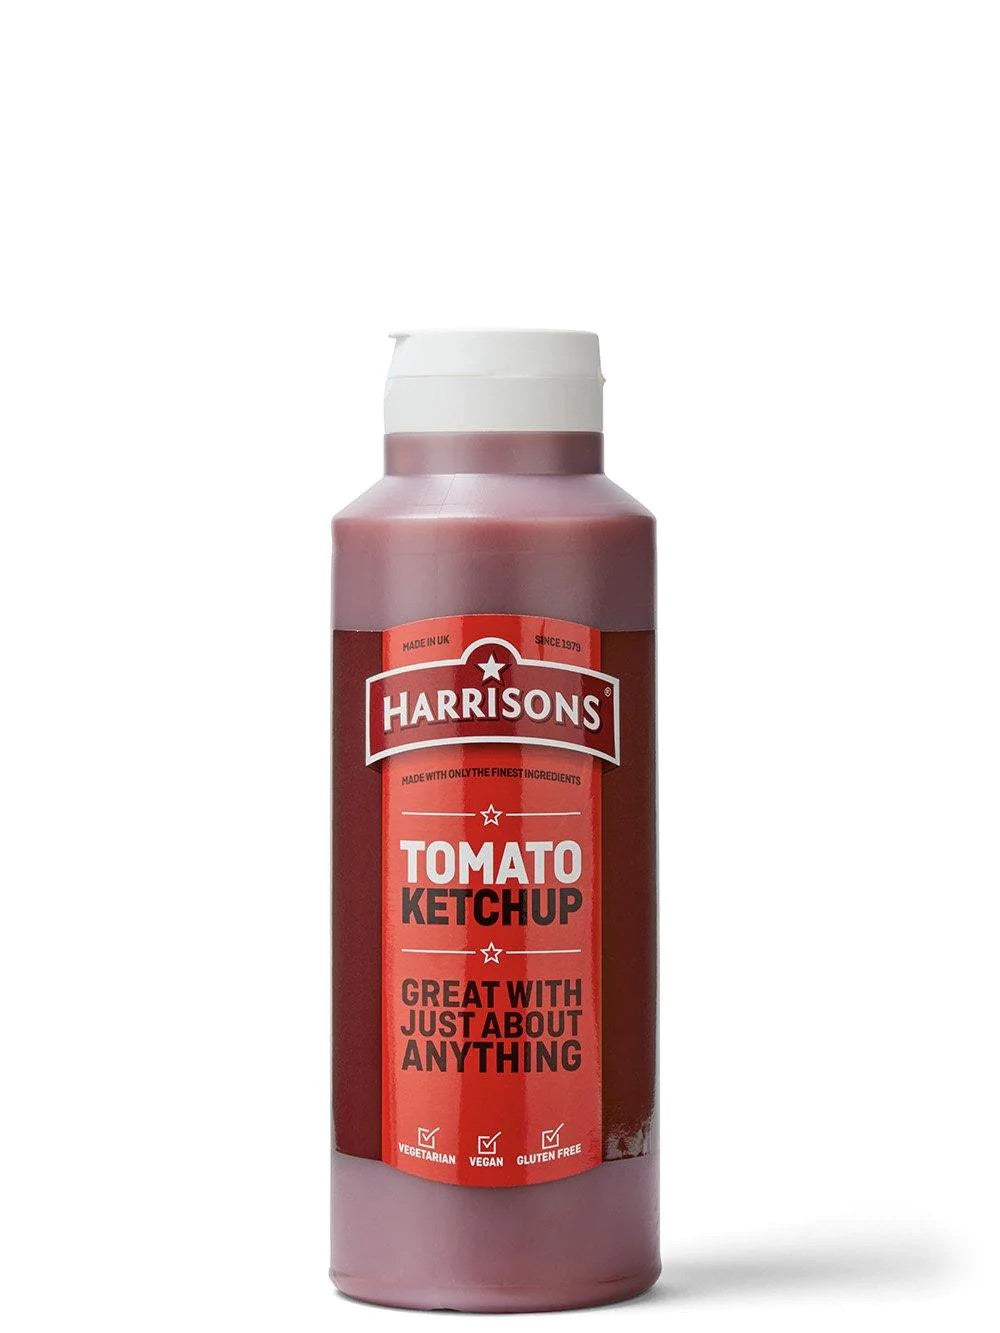 Harrisons Tomato Ketchup